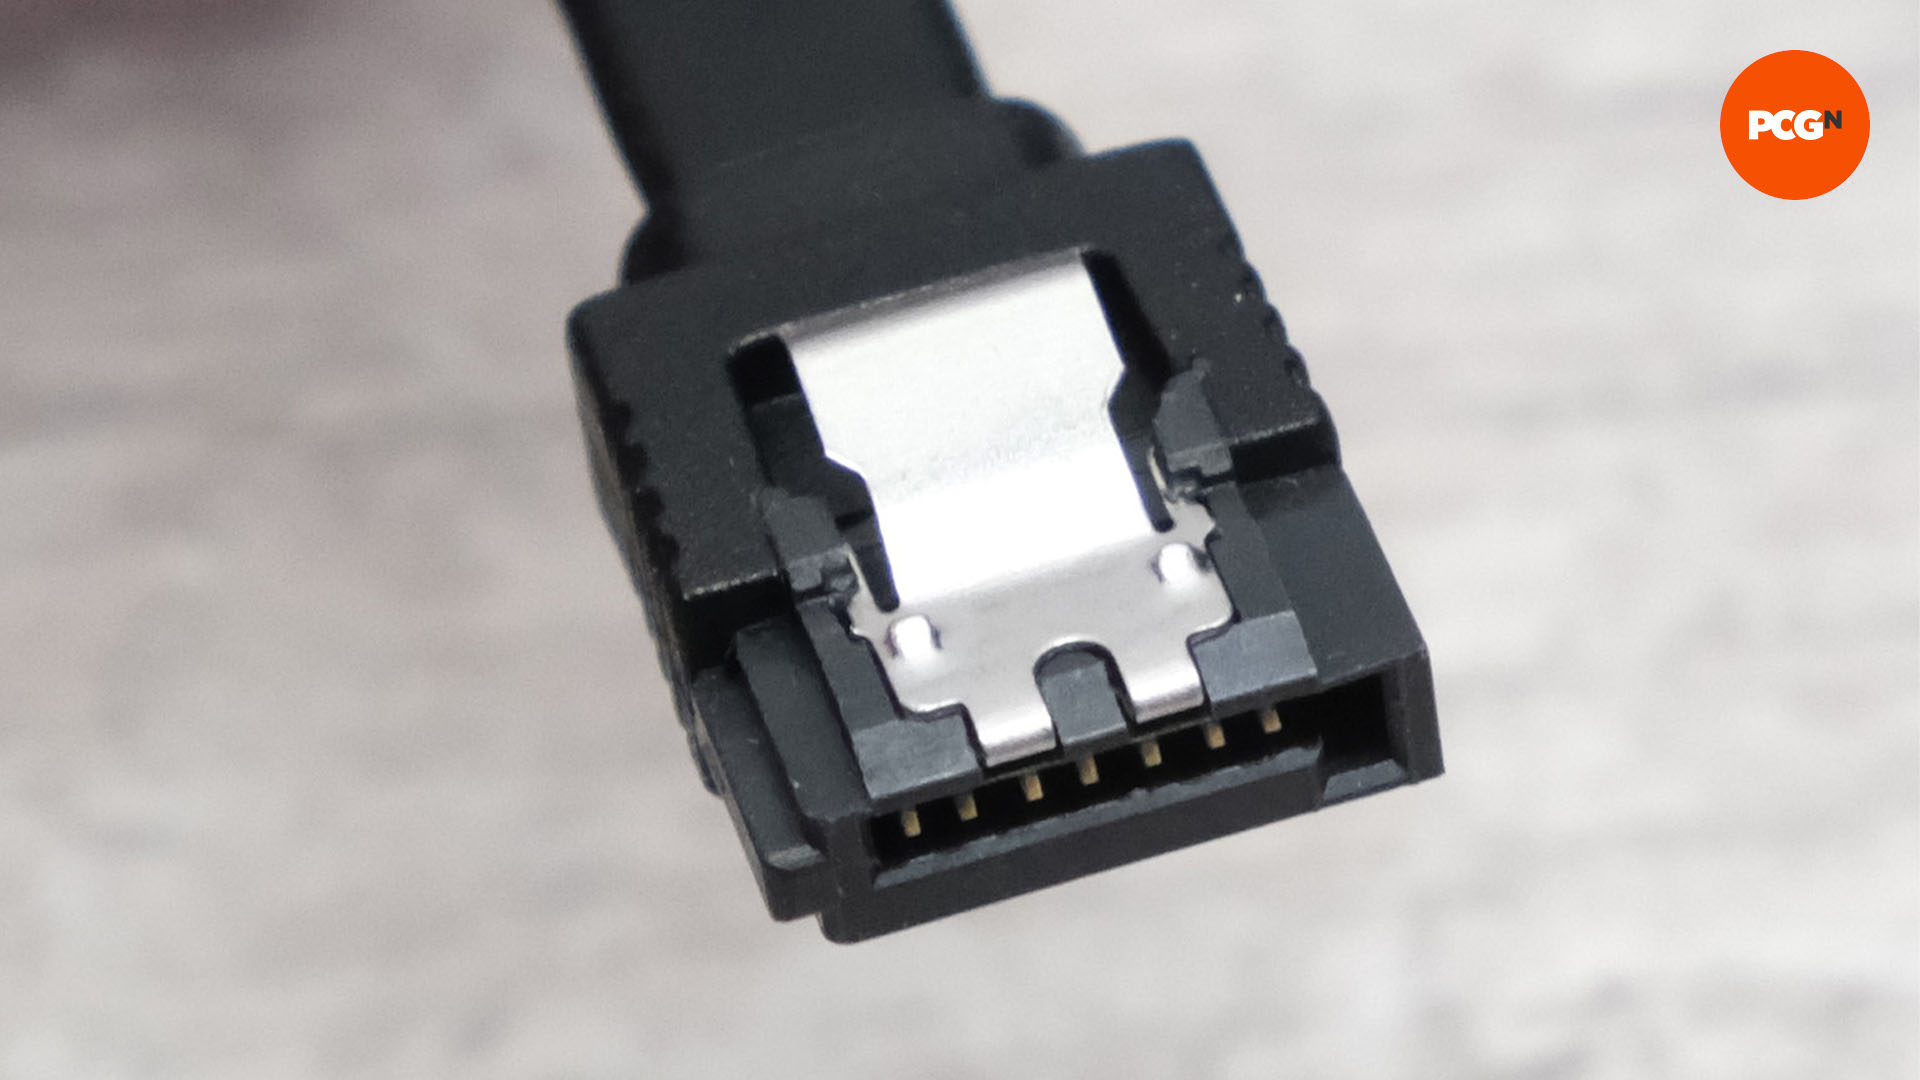 A sata data cable for building a gaming PC